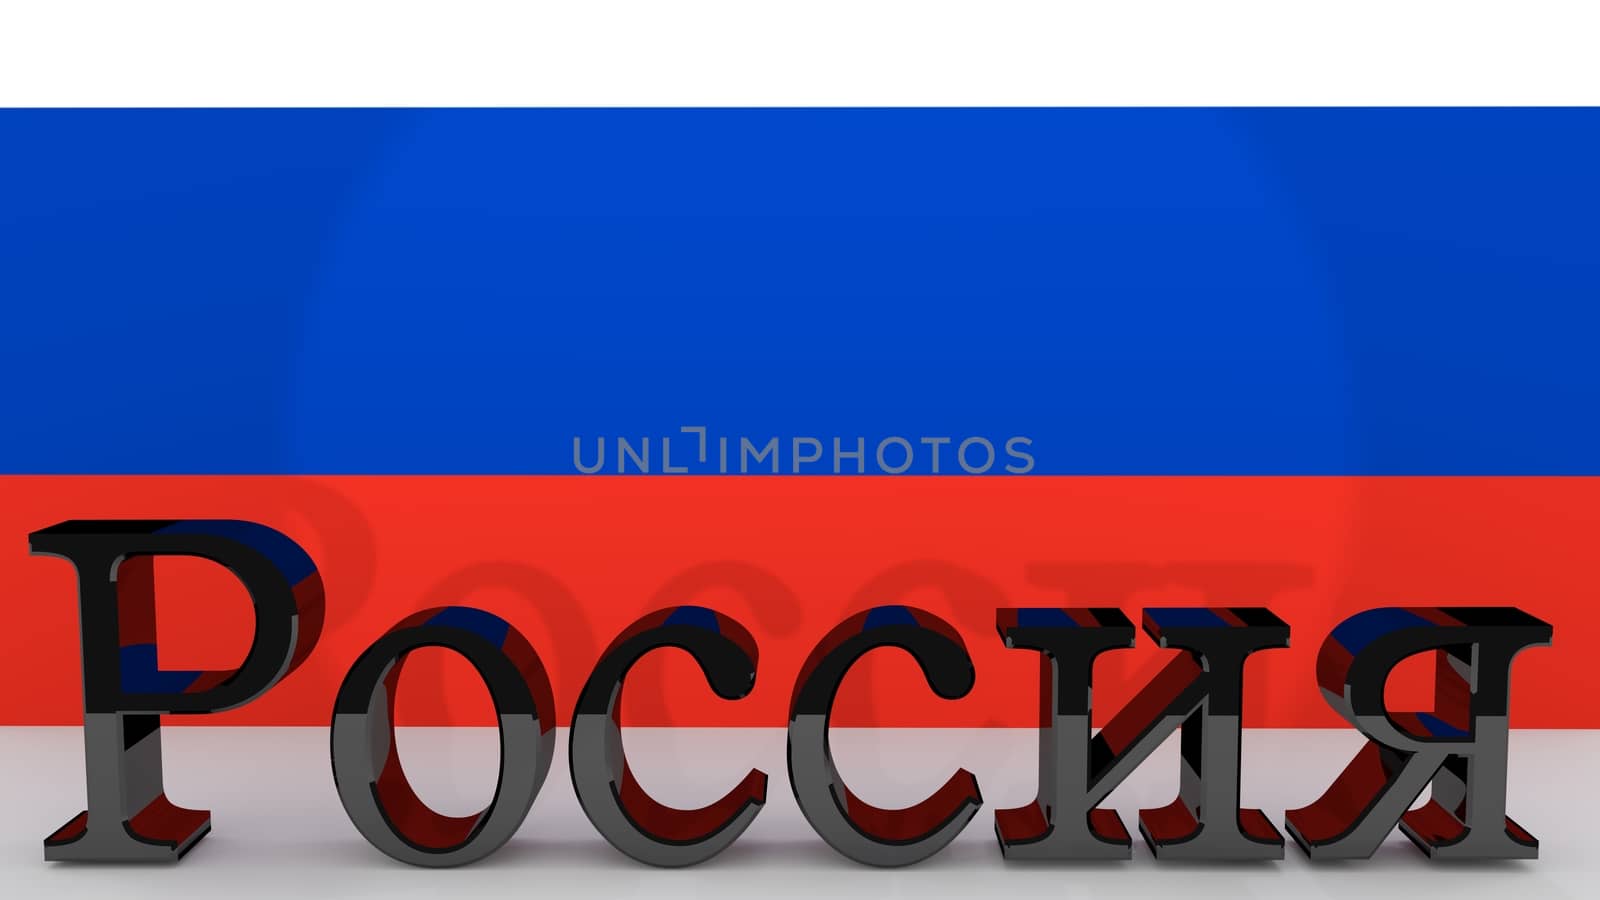 Cyrillic characters made of dark metal meaning Russia in front of a russian flag